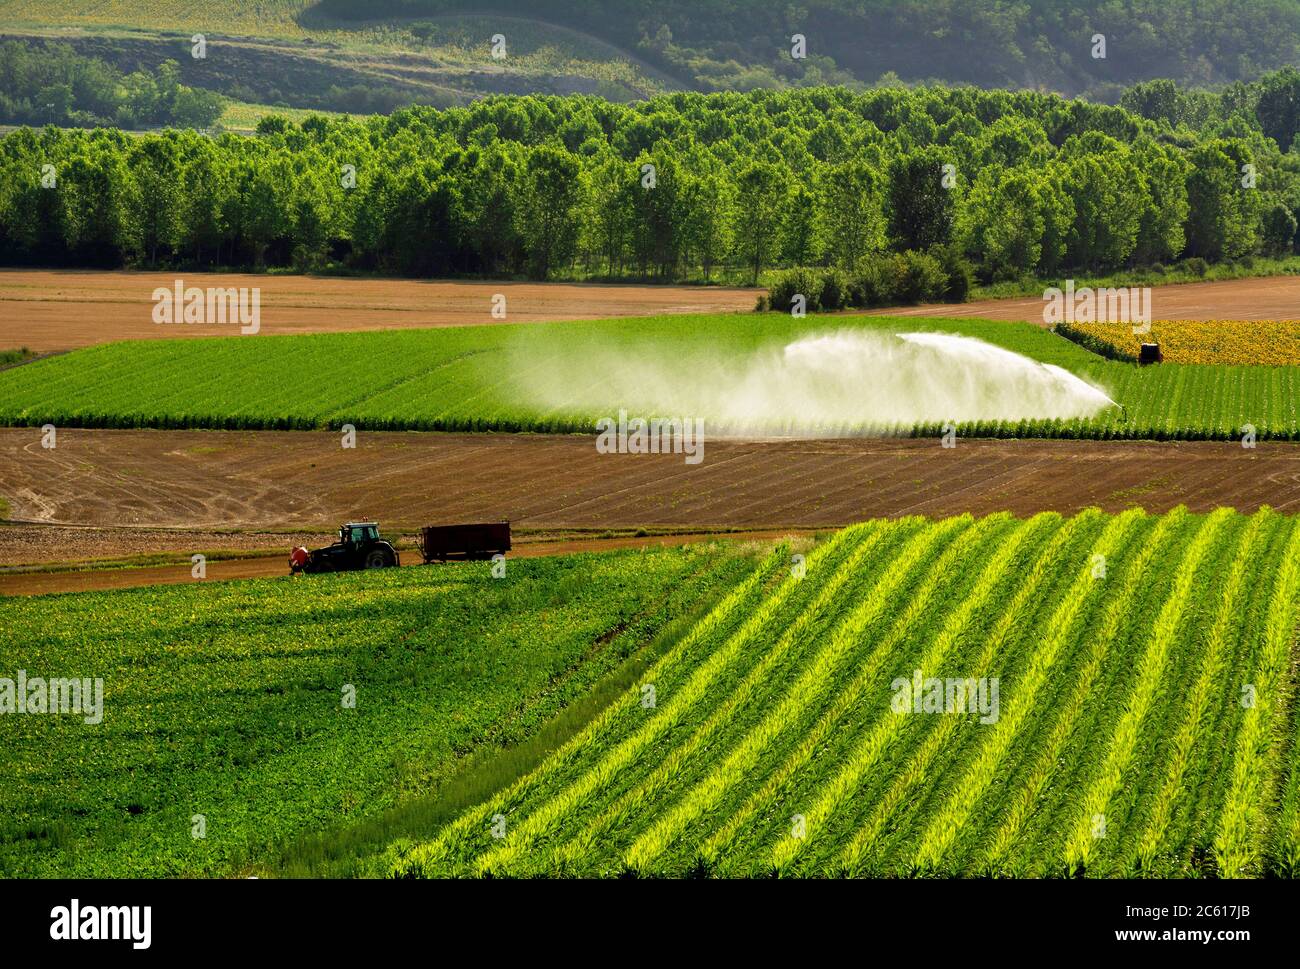 Watering system watering a field of maize, Puy de Dome depatment, Limagne plain, Auvergne Rhone Alpes,  France Stock Photo